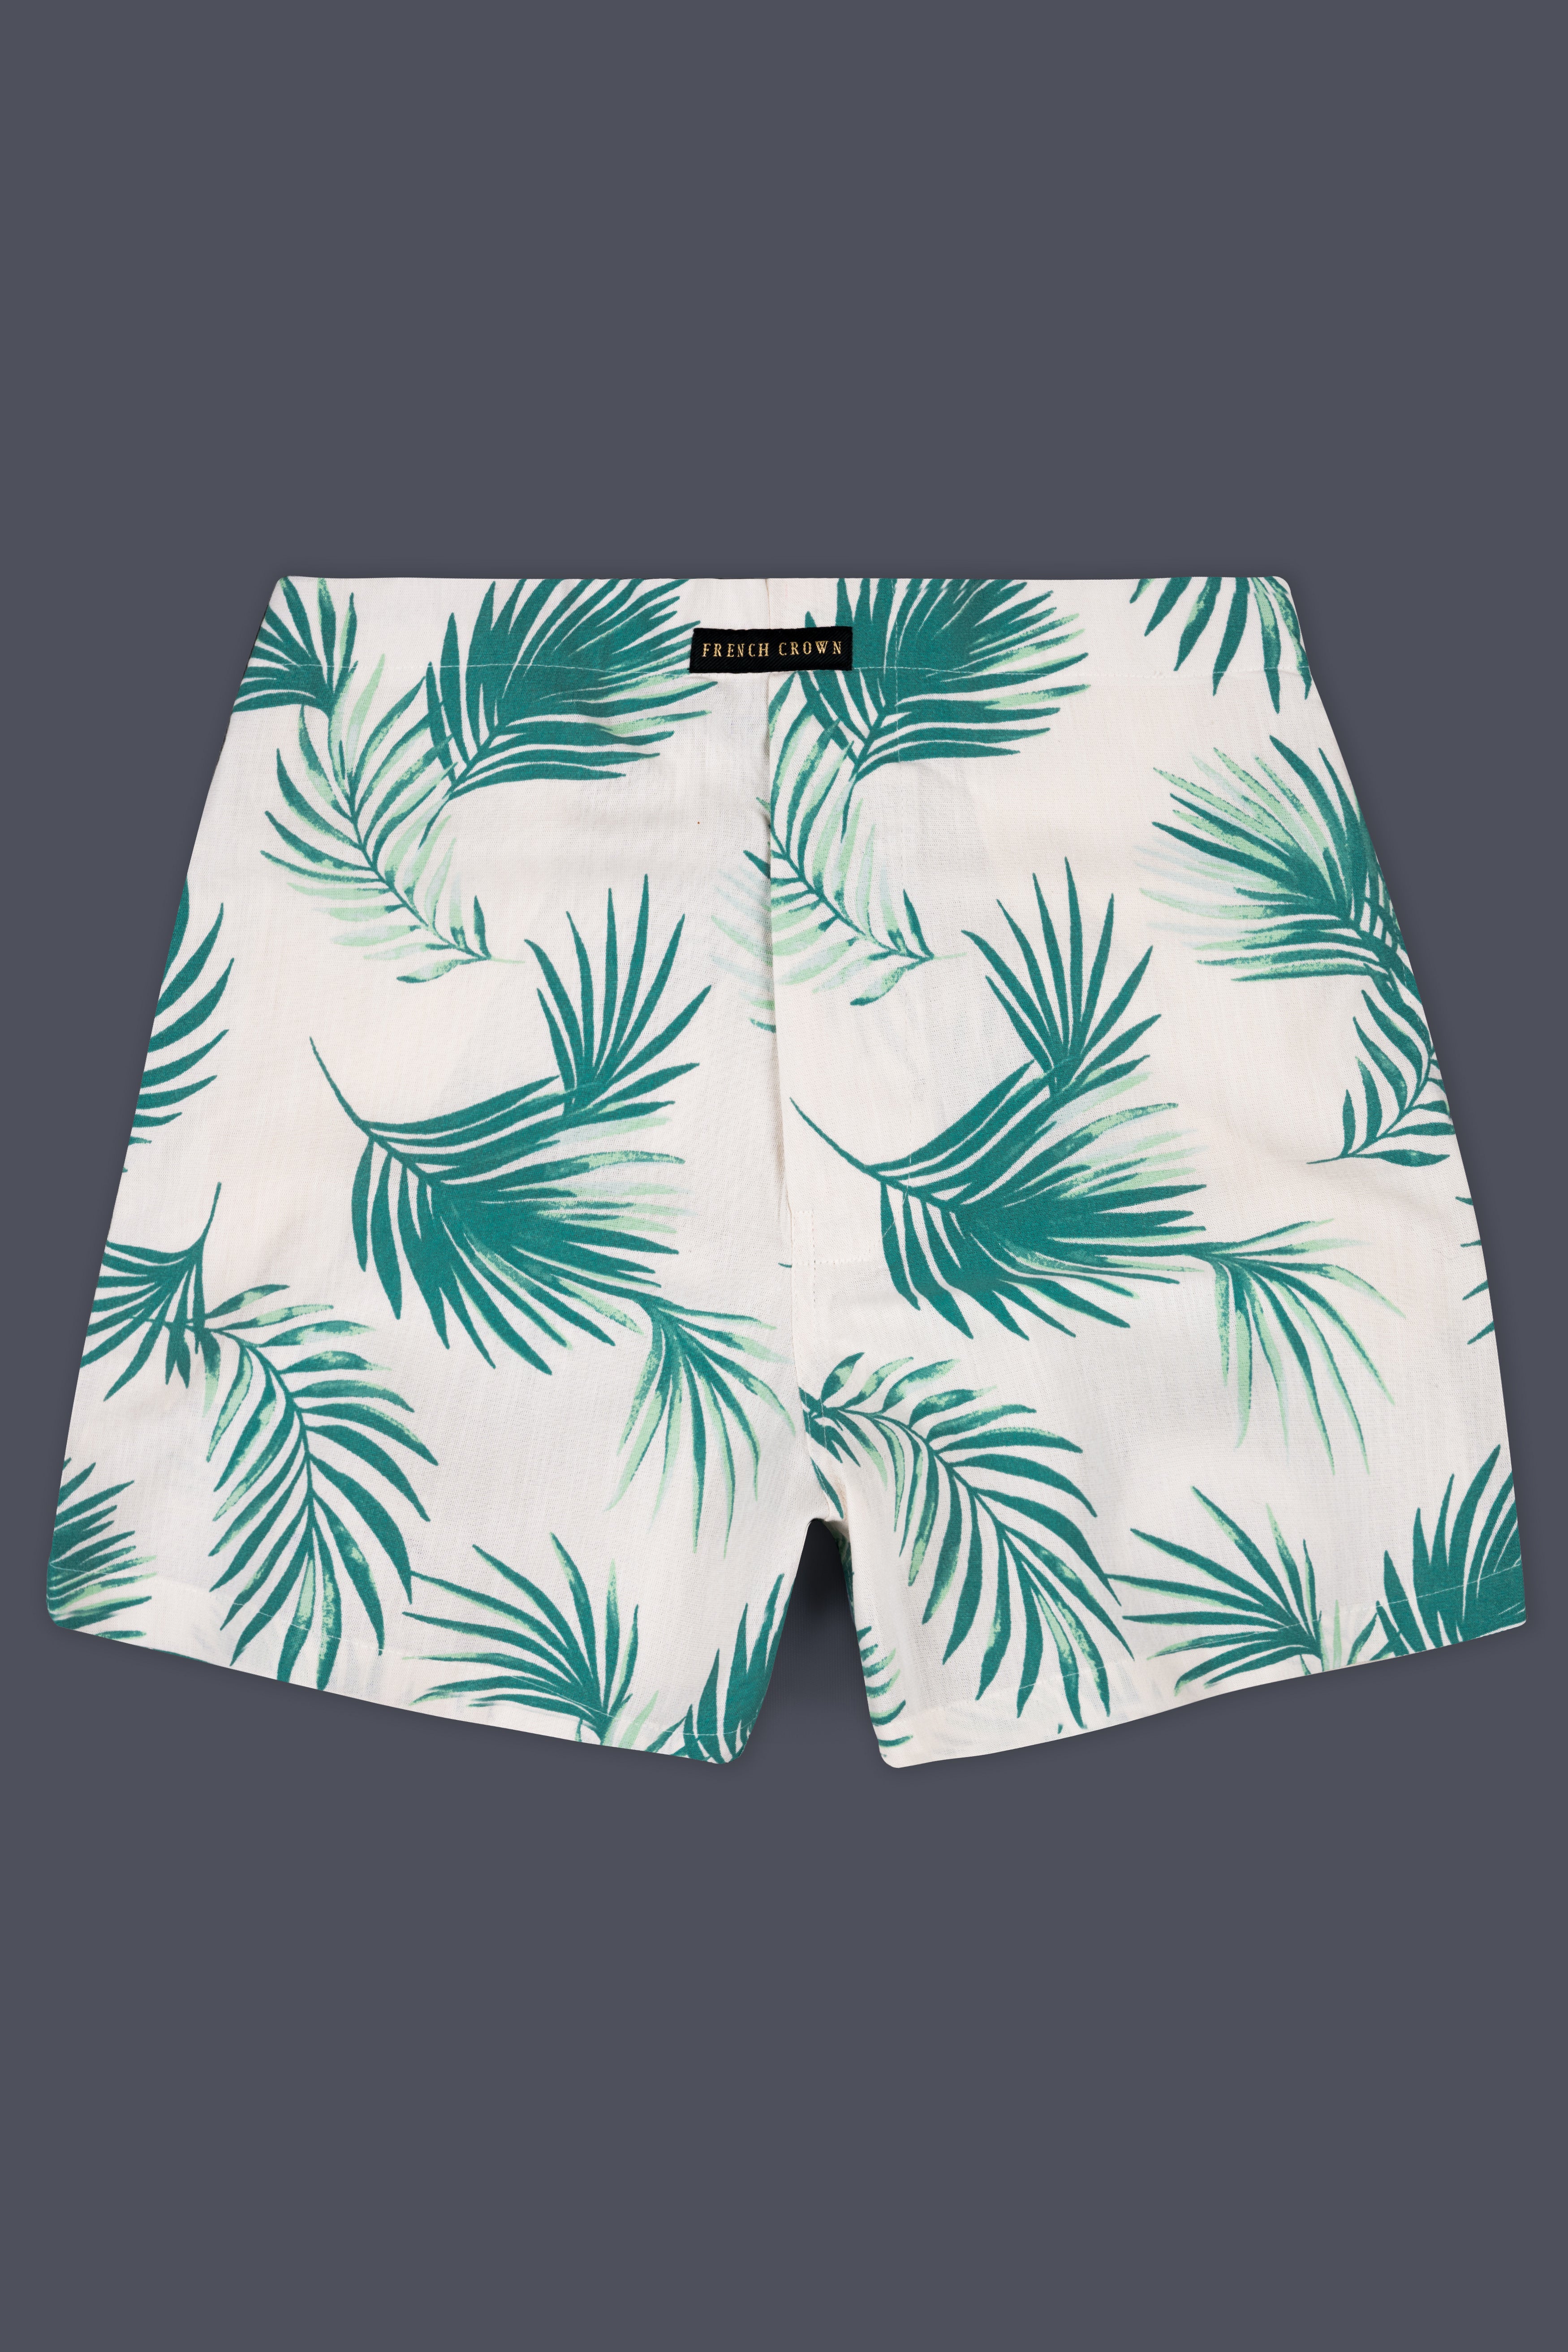 Bright White and Viridian Blue Leaf Prints Luxurious Linen Boxer